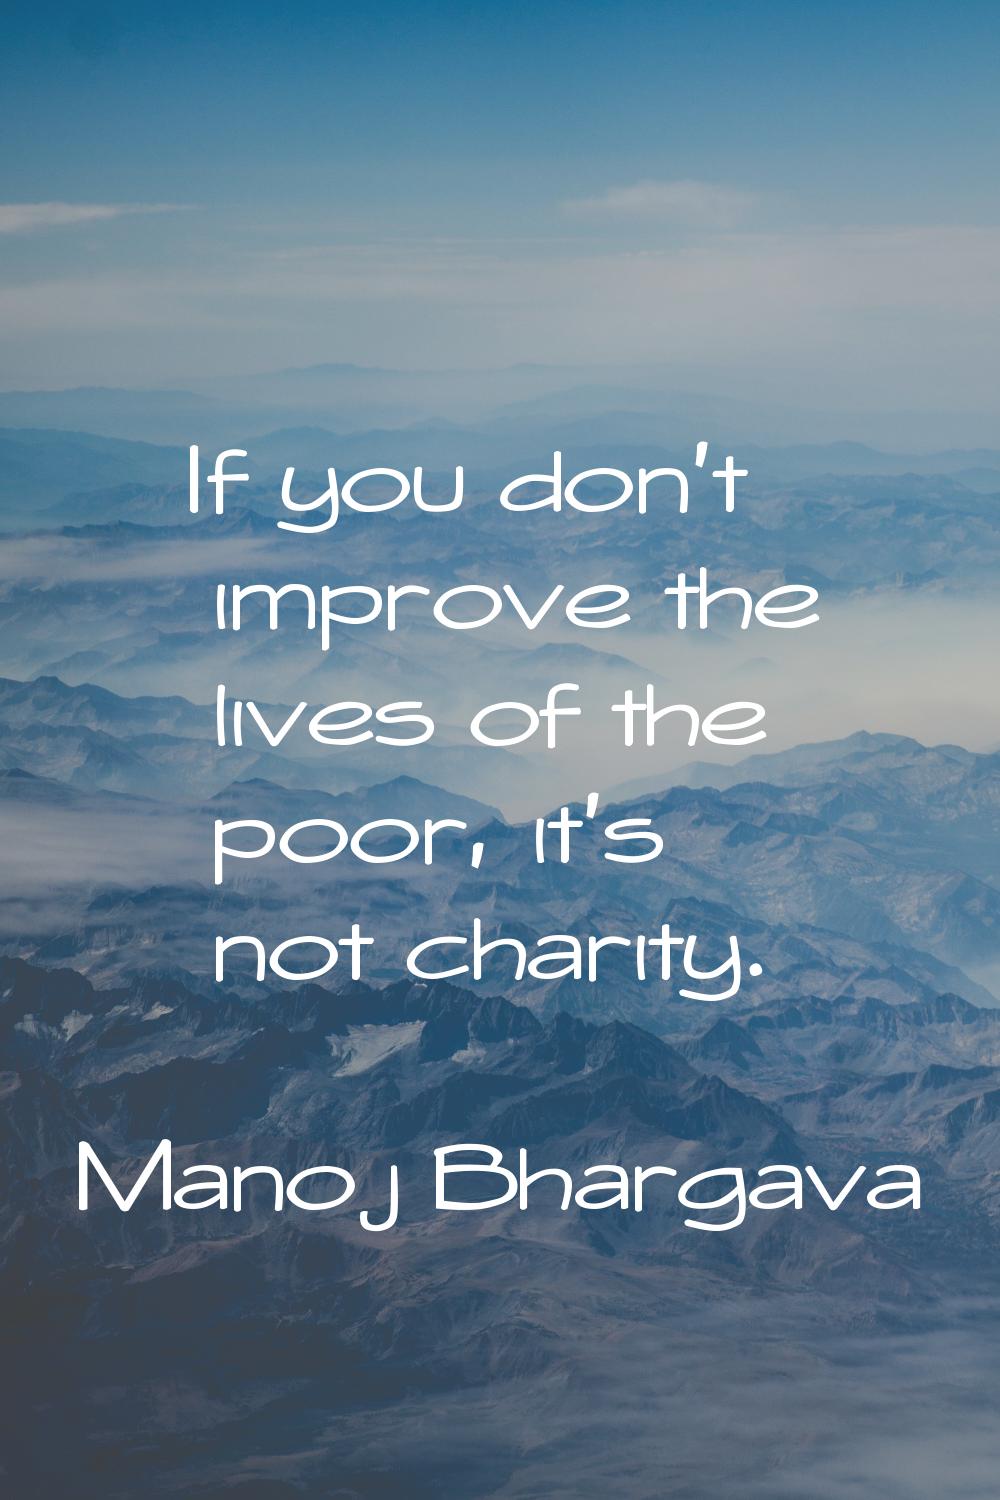 If you don't improve the lives of the poor, it's not charity.